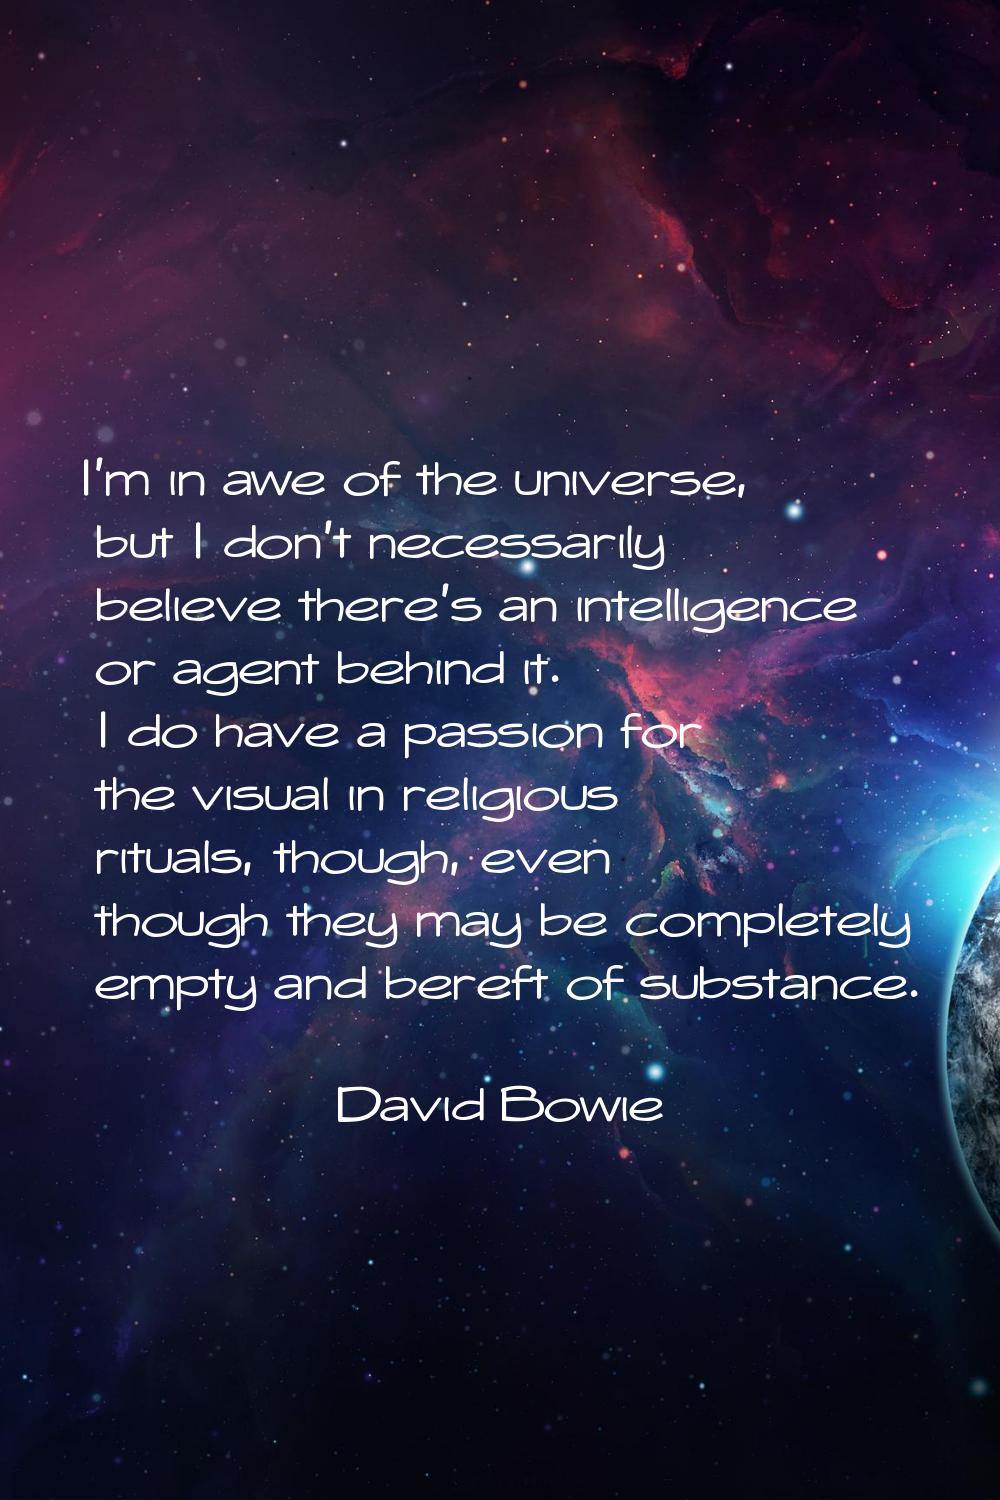 I'm in awe of the universe, but I don't necessarily believe there's an intelligence or agent behind